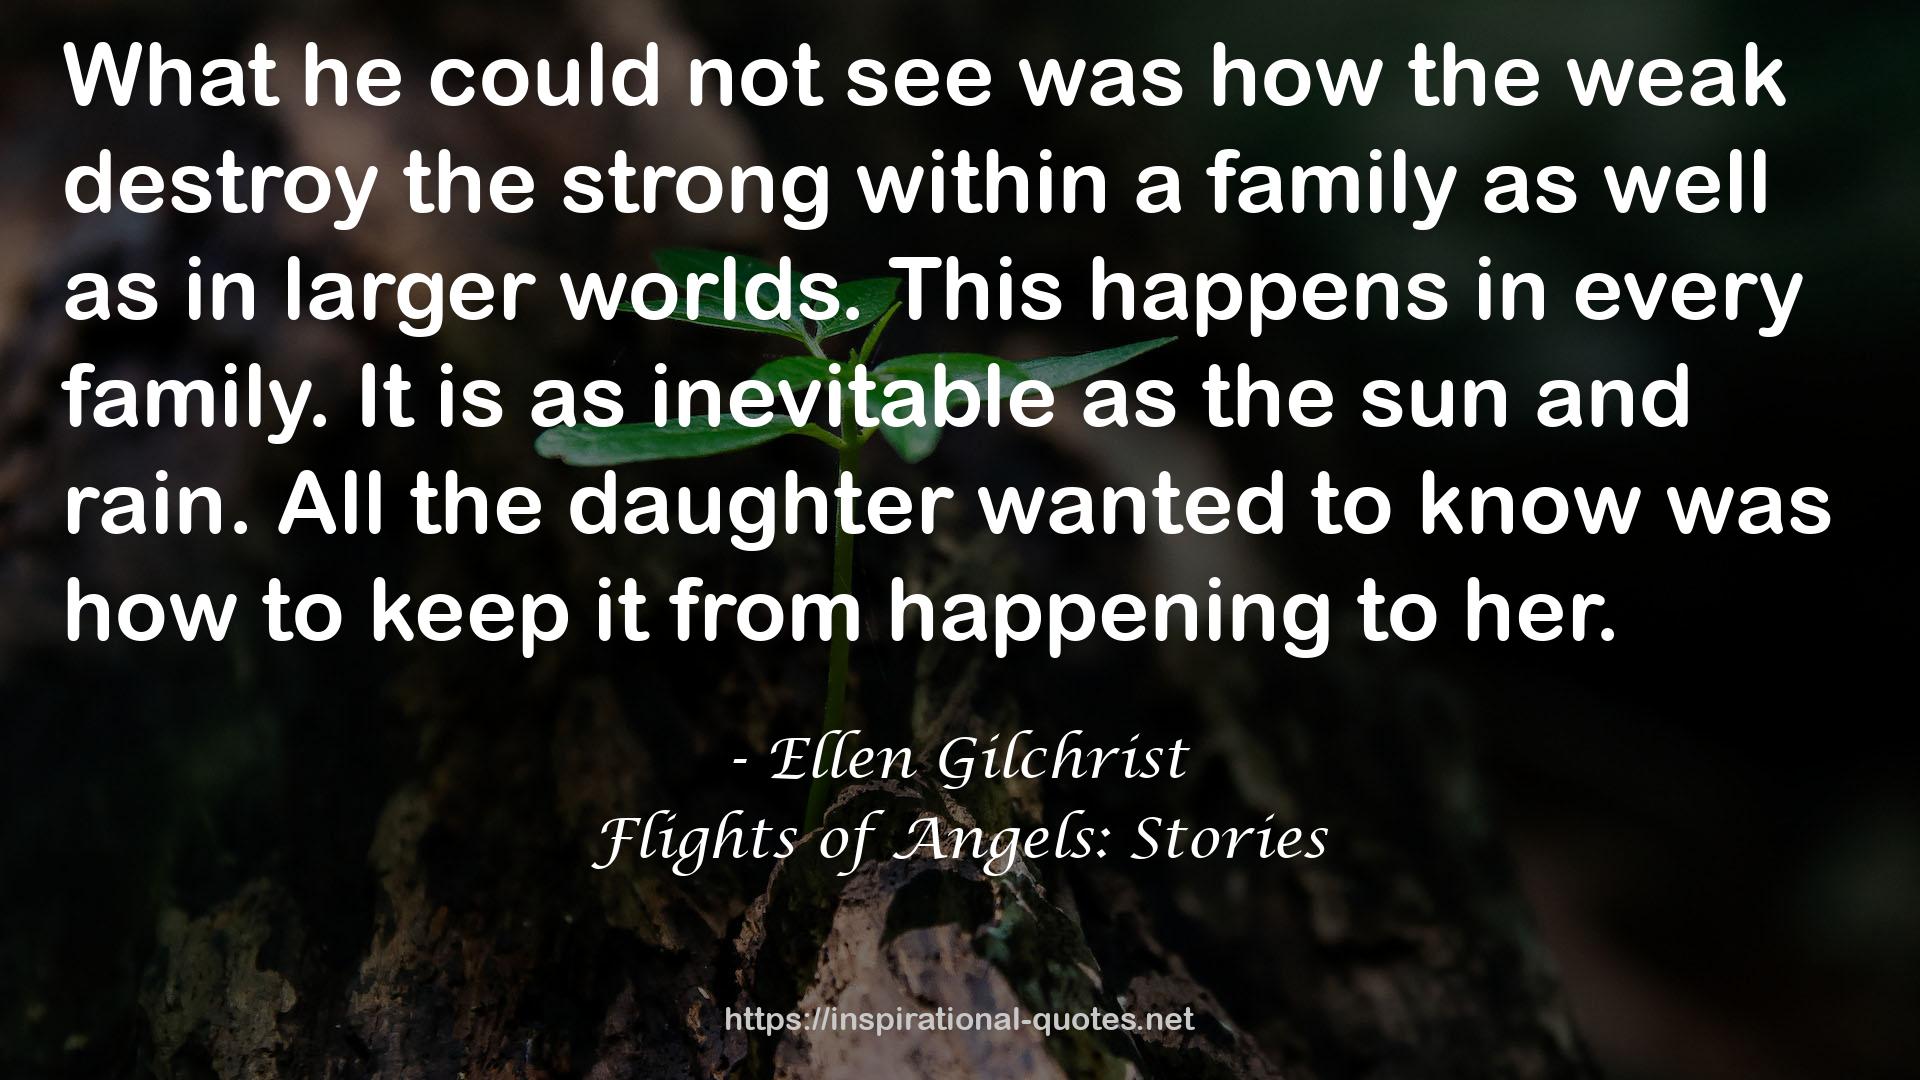 Flights of Angels: Stories QUOTES